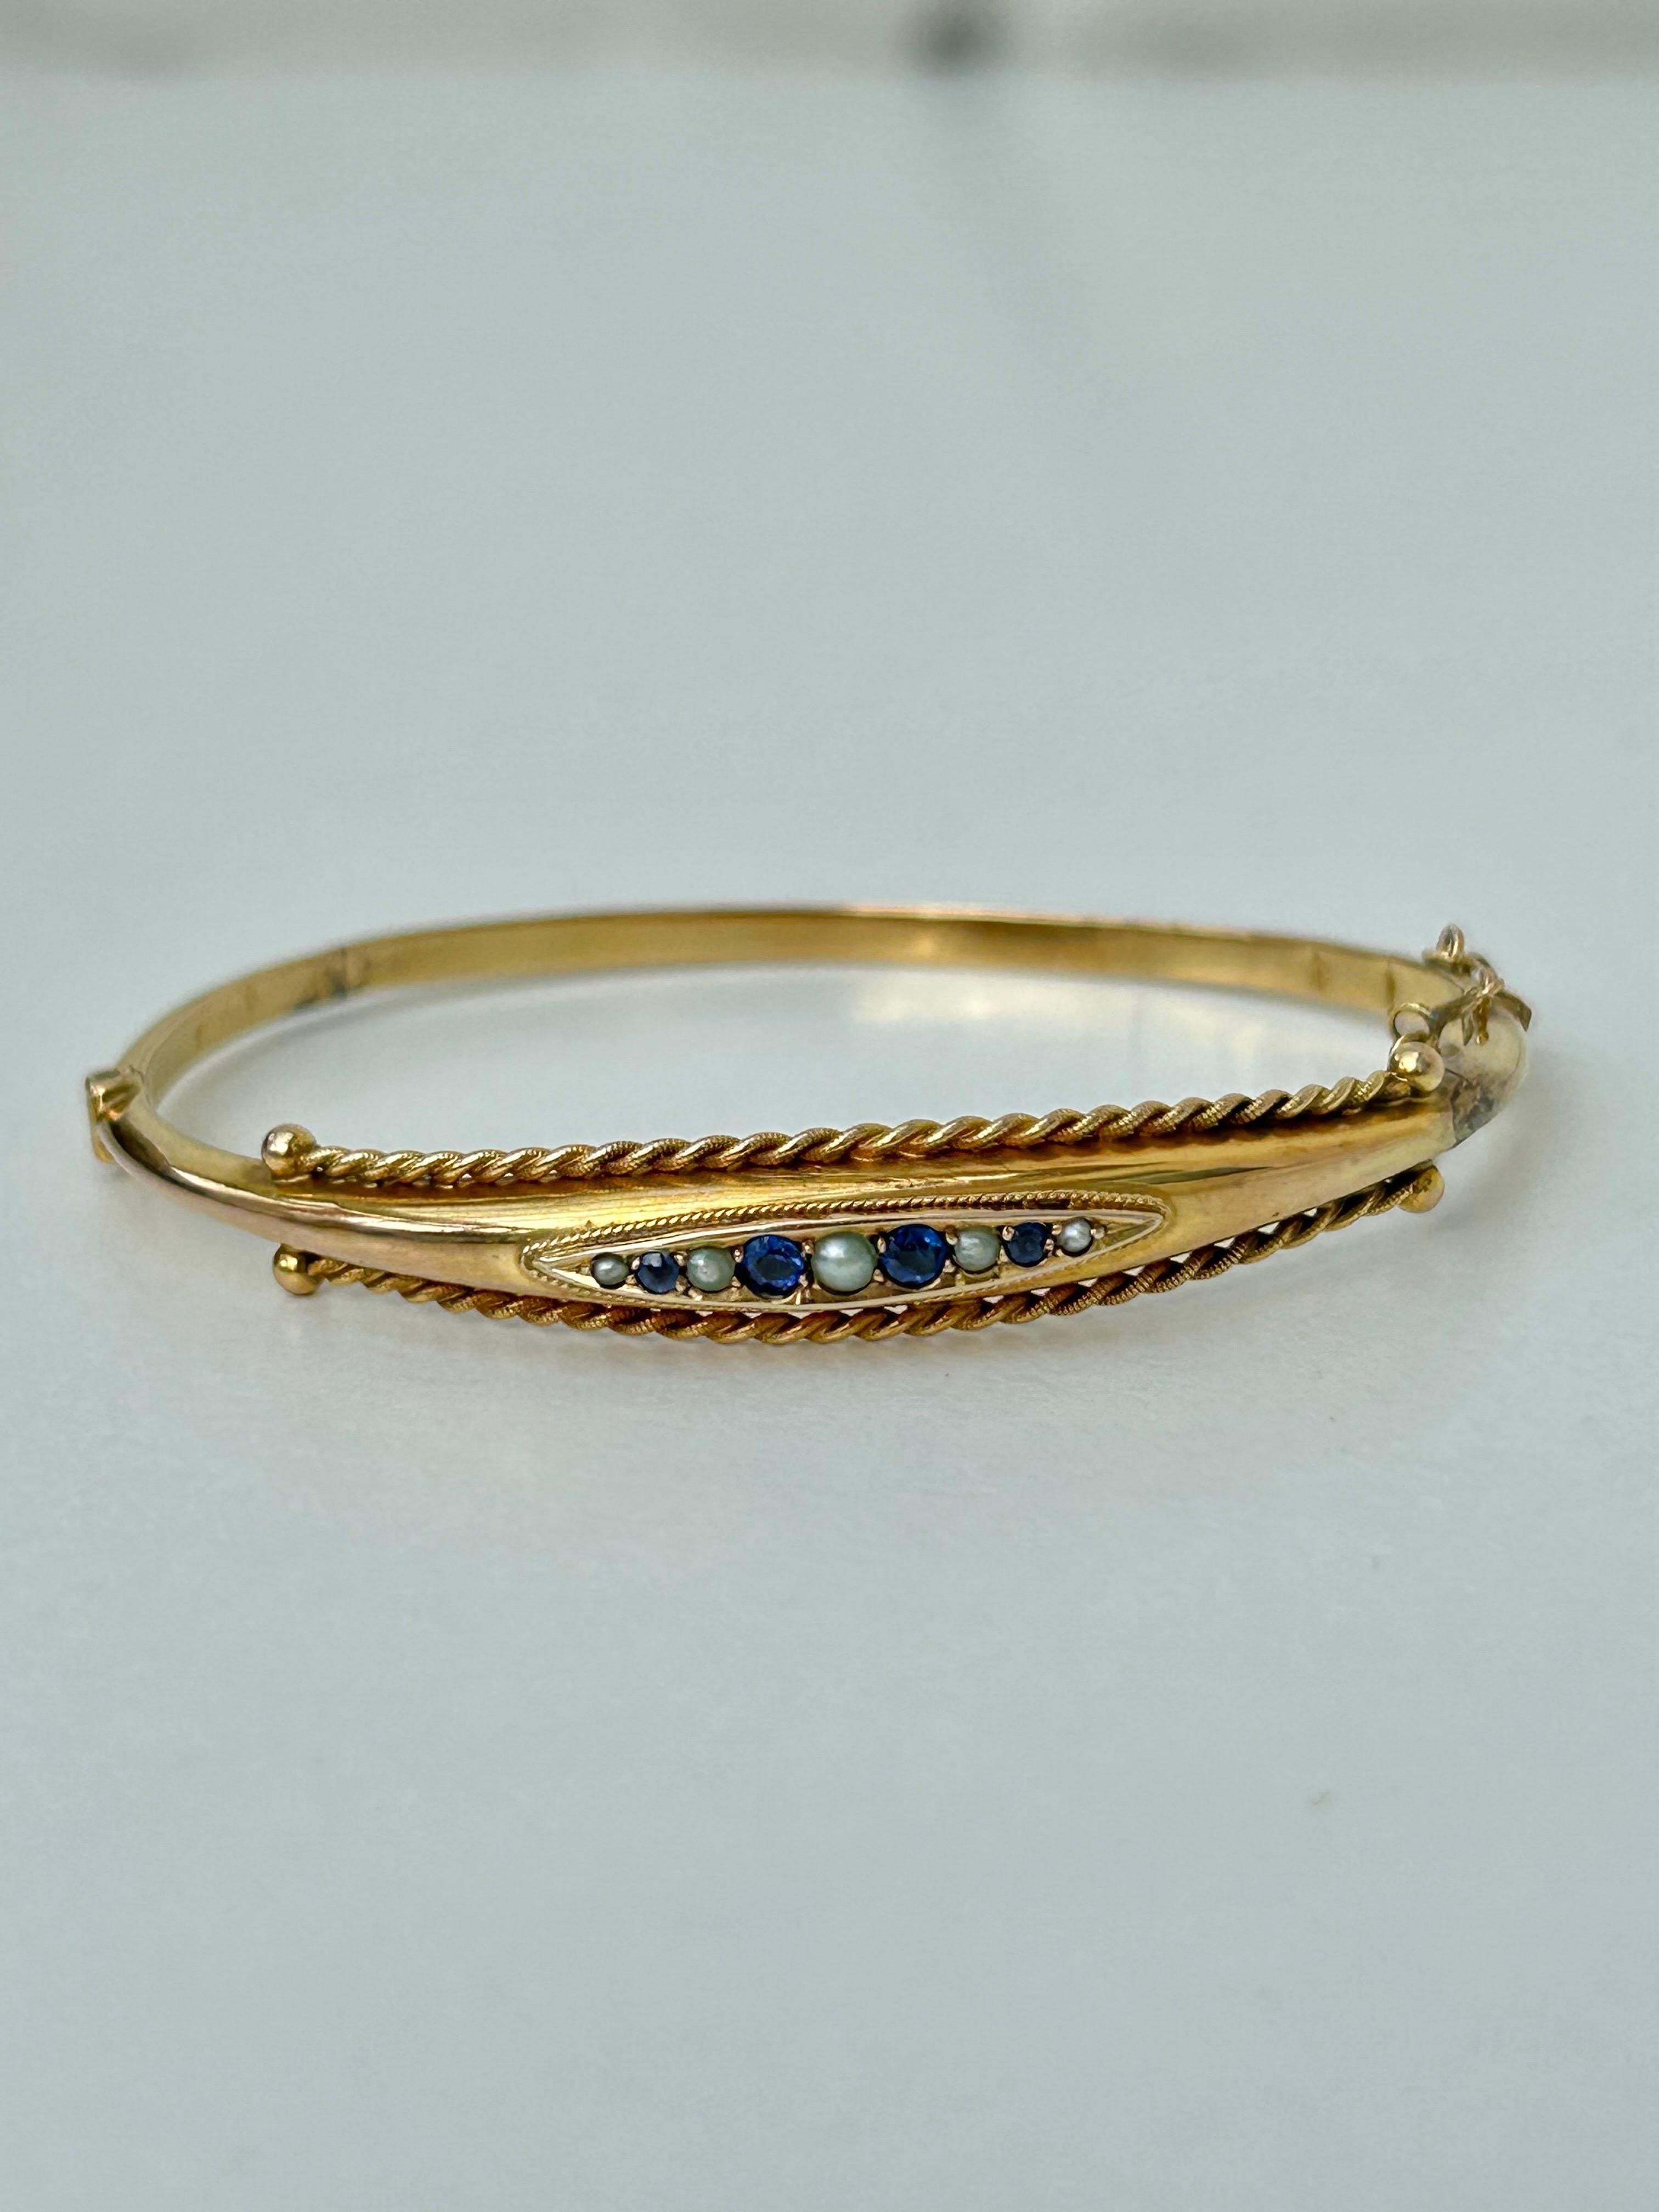 Antique C.1898 Sapphire and Pearl Bangle Bracelet in 9ct Yellow Gold 

delightful sapphire and pearl bangle, so sweet! 

The item comes without the box in the photos but will be presented in a gembank1973 gift box
 
Measurements: Weight 6.19g, inner